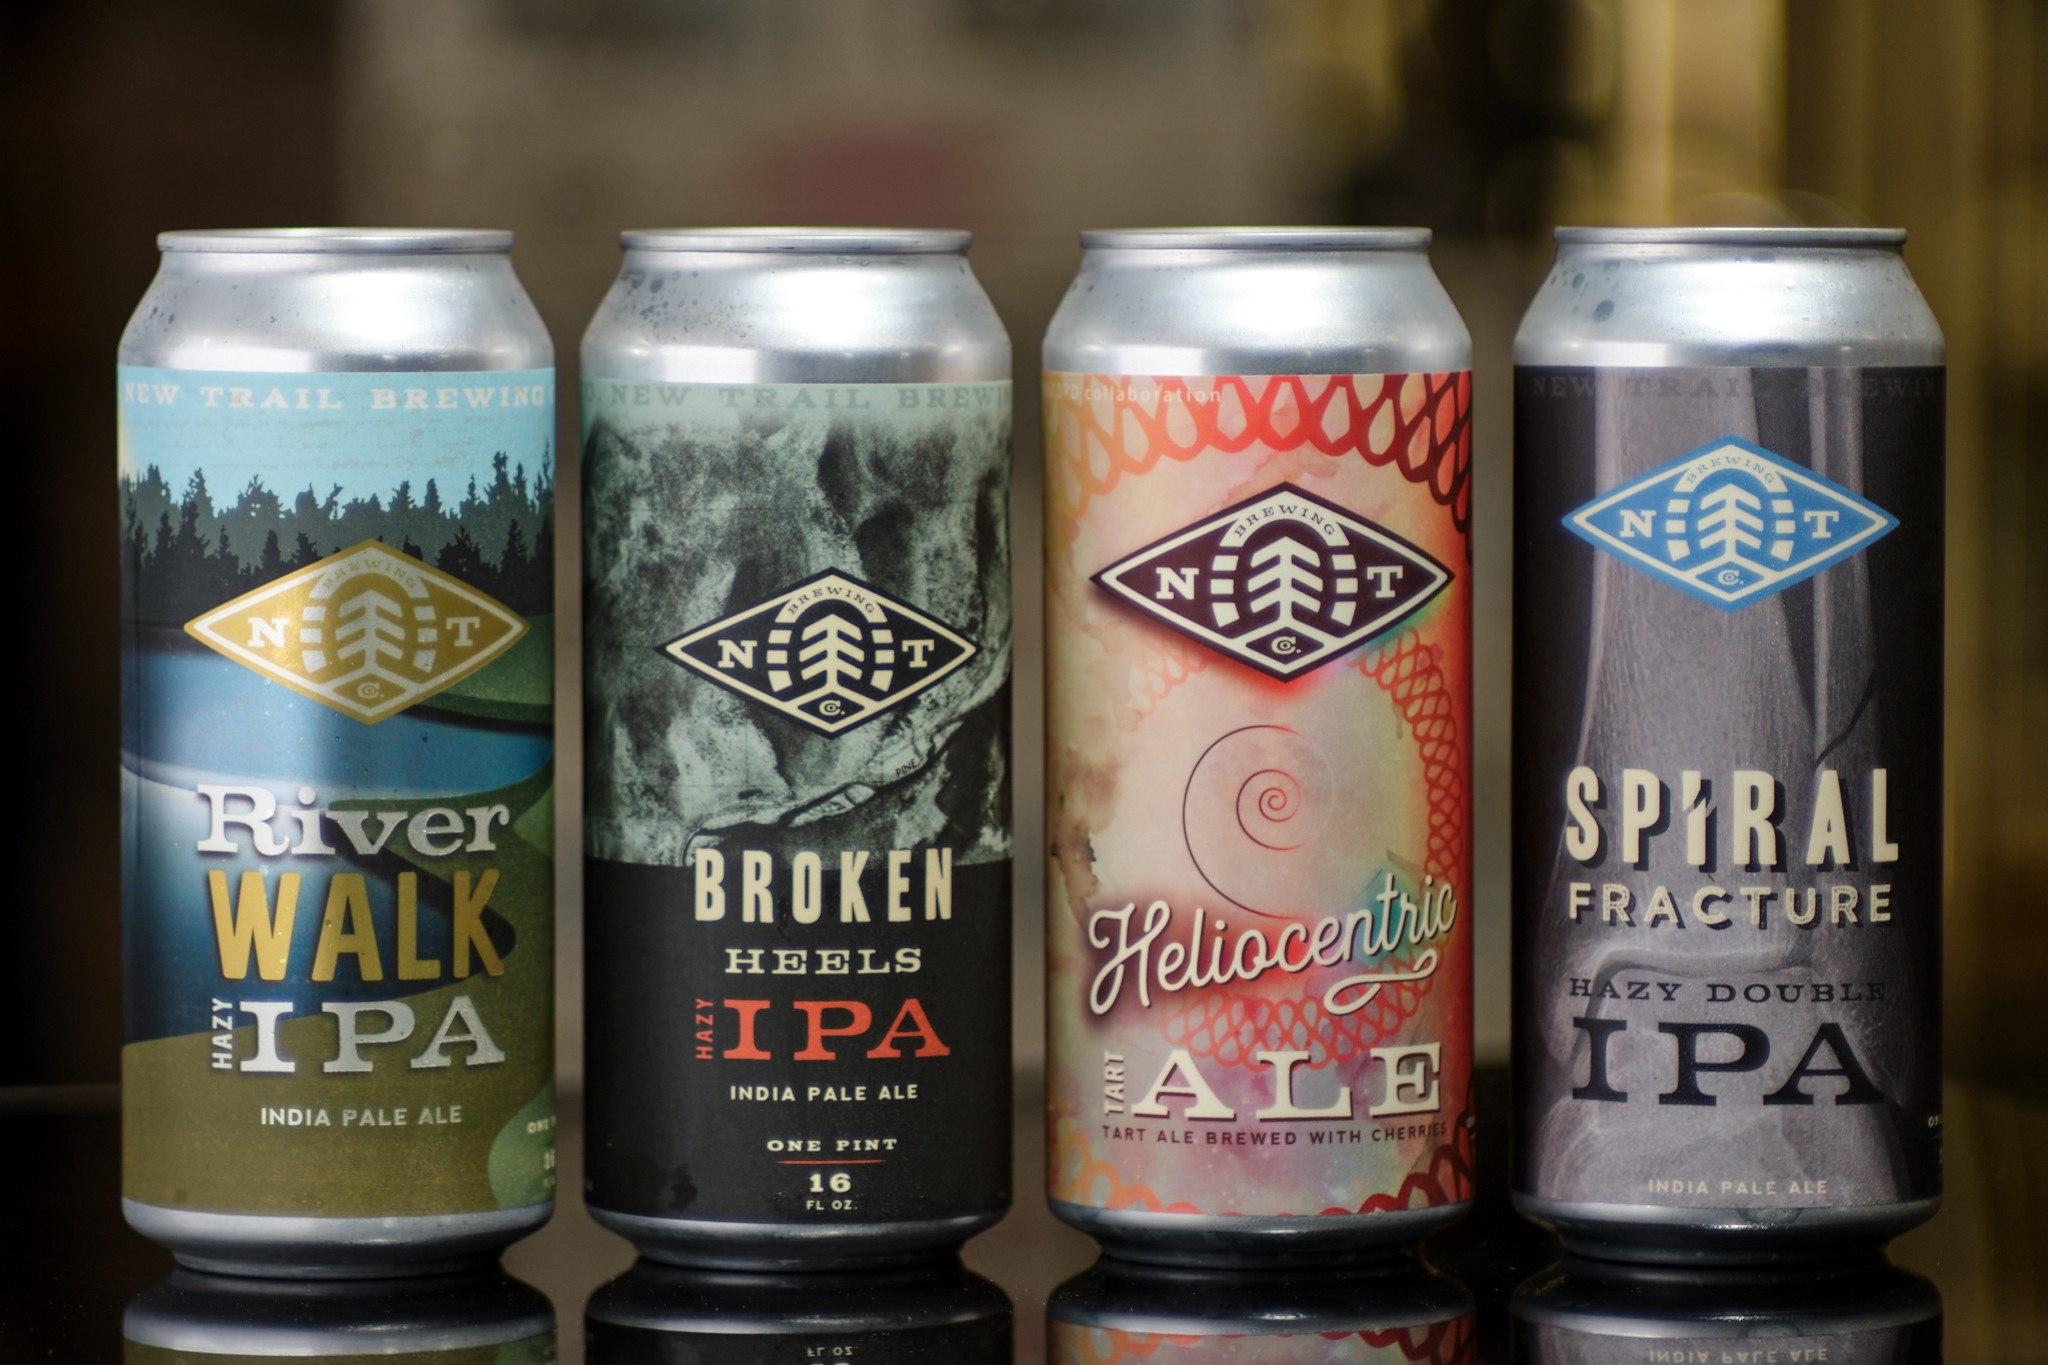 New cans in from New Trail! - 61 Brew Thru